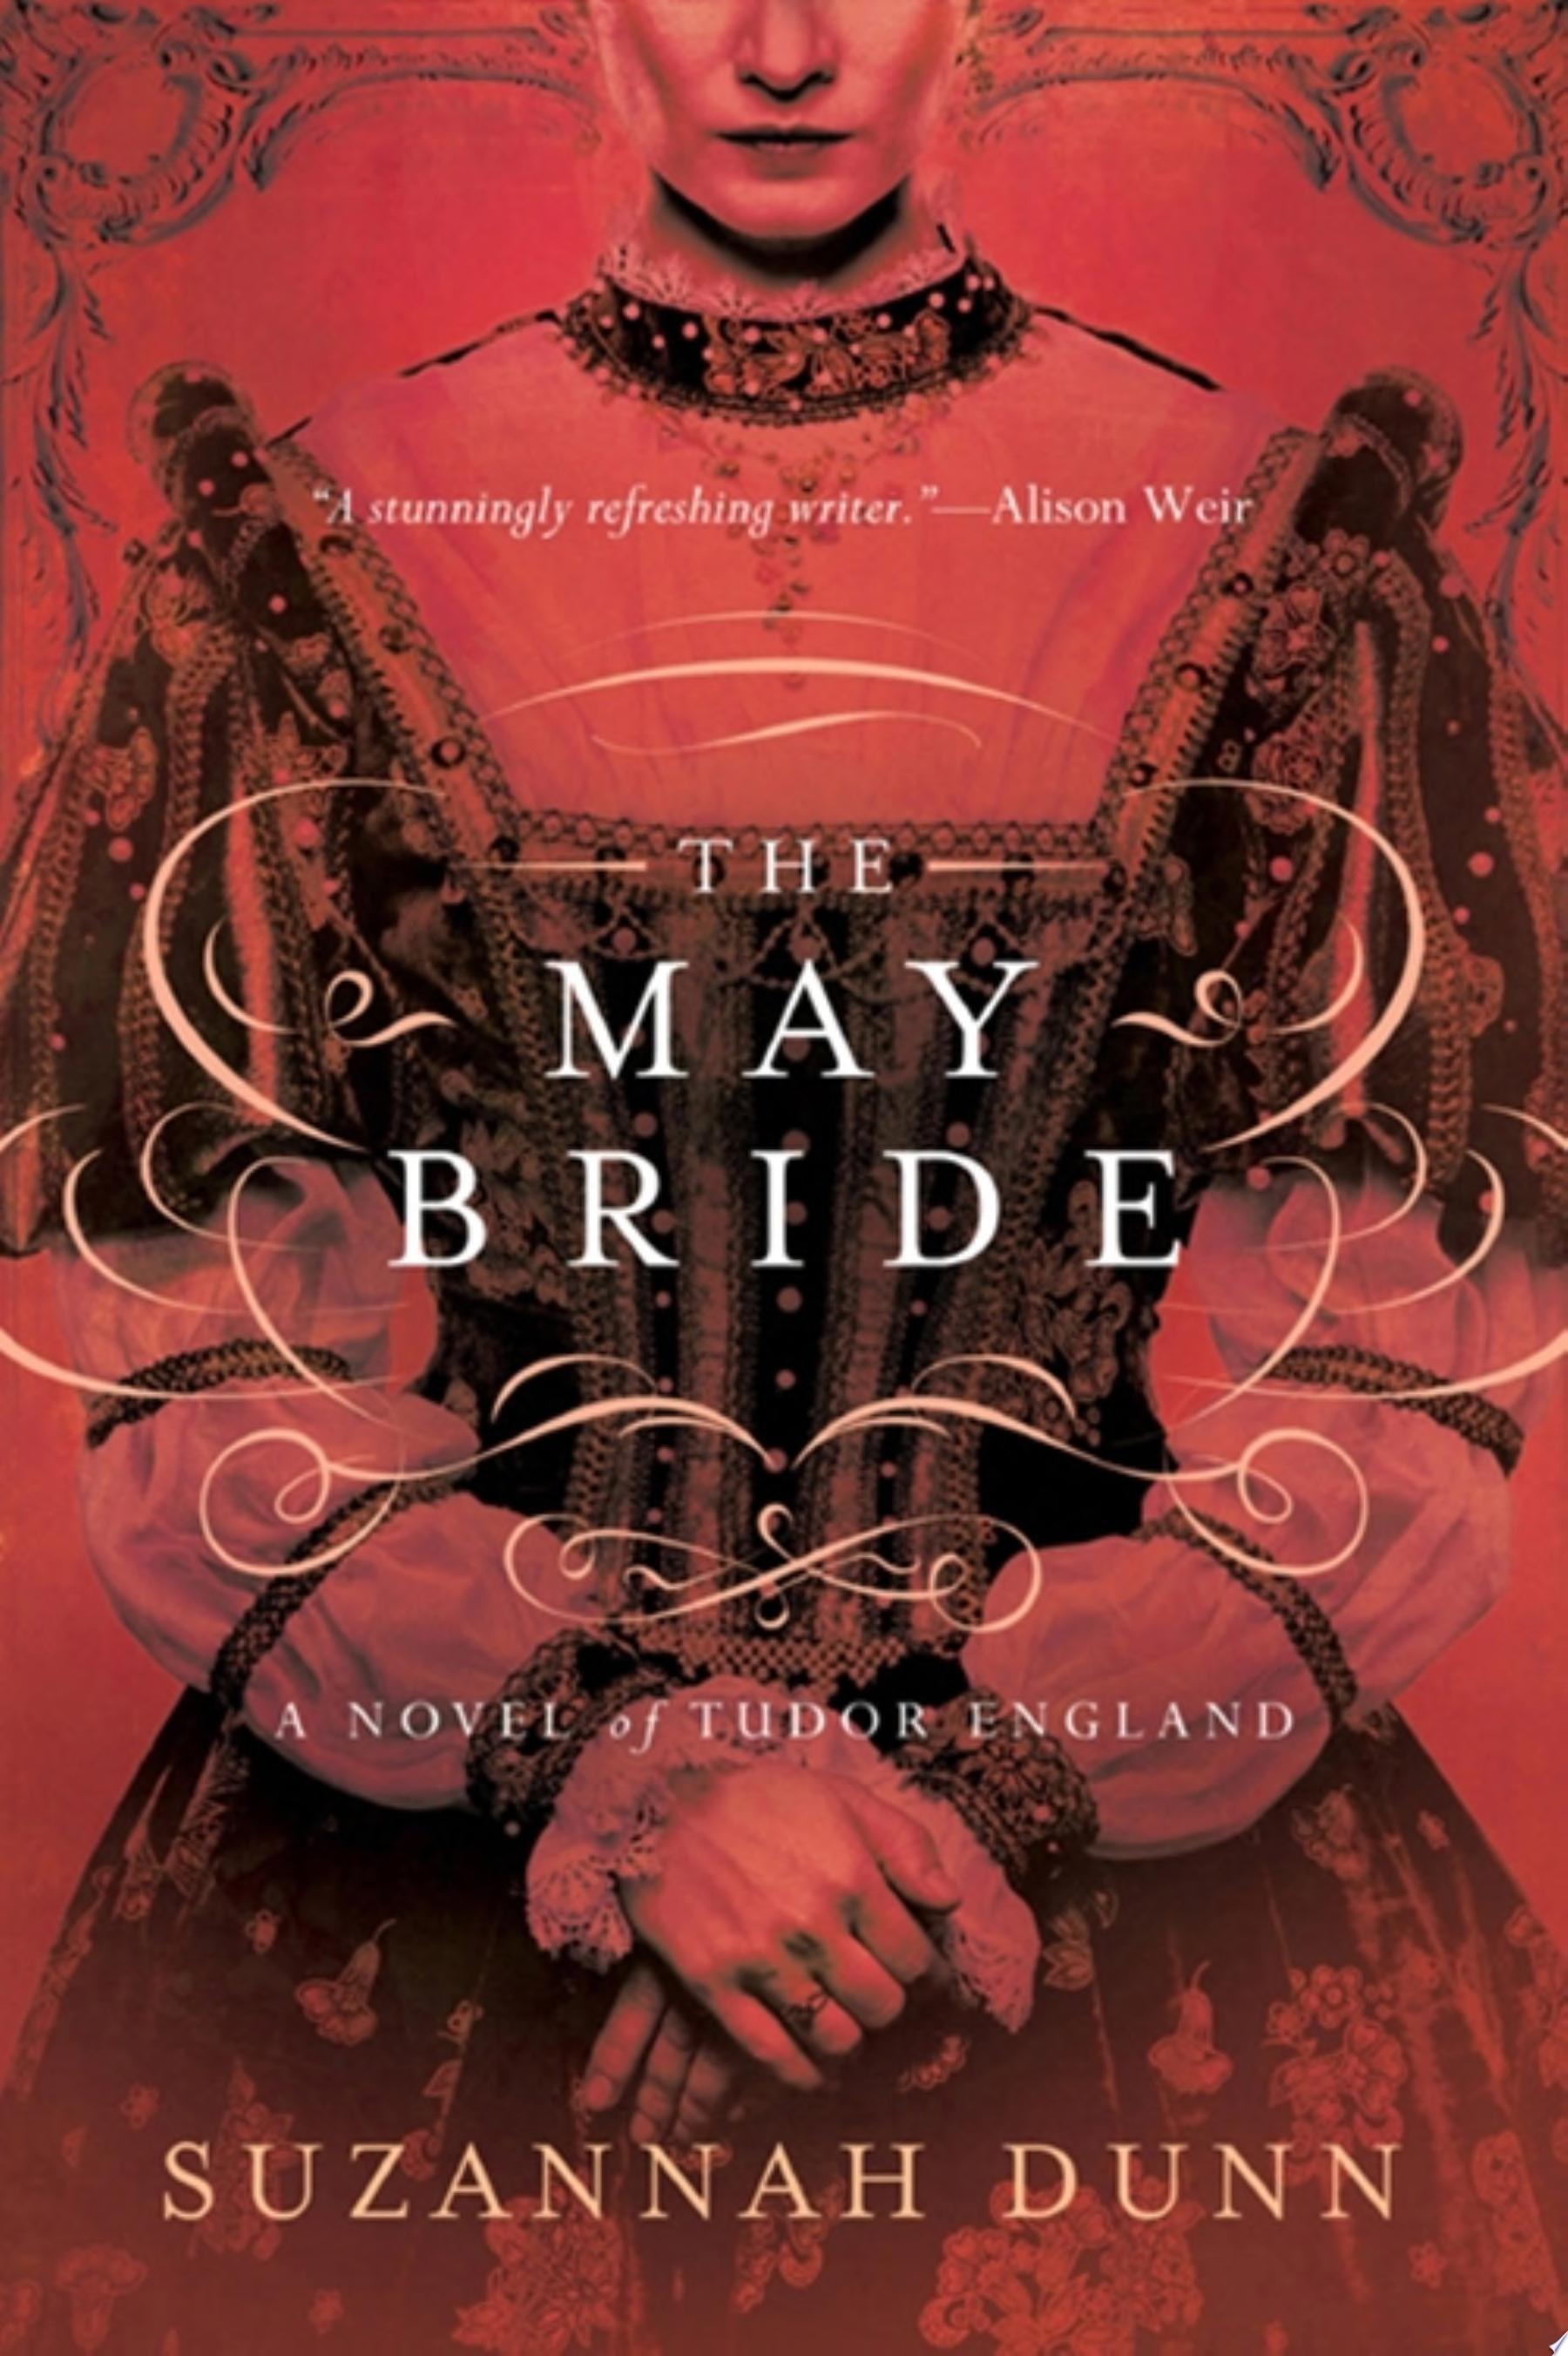 Image for "The May Bride"